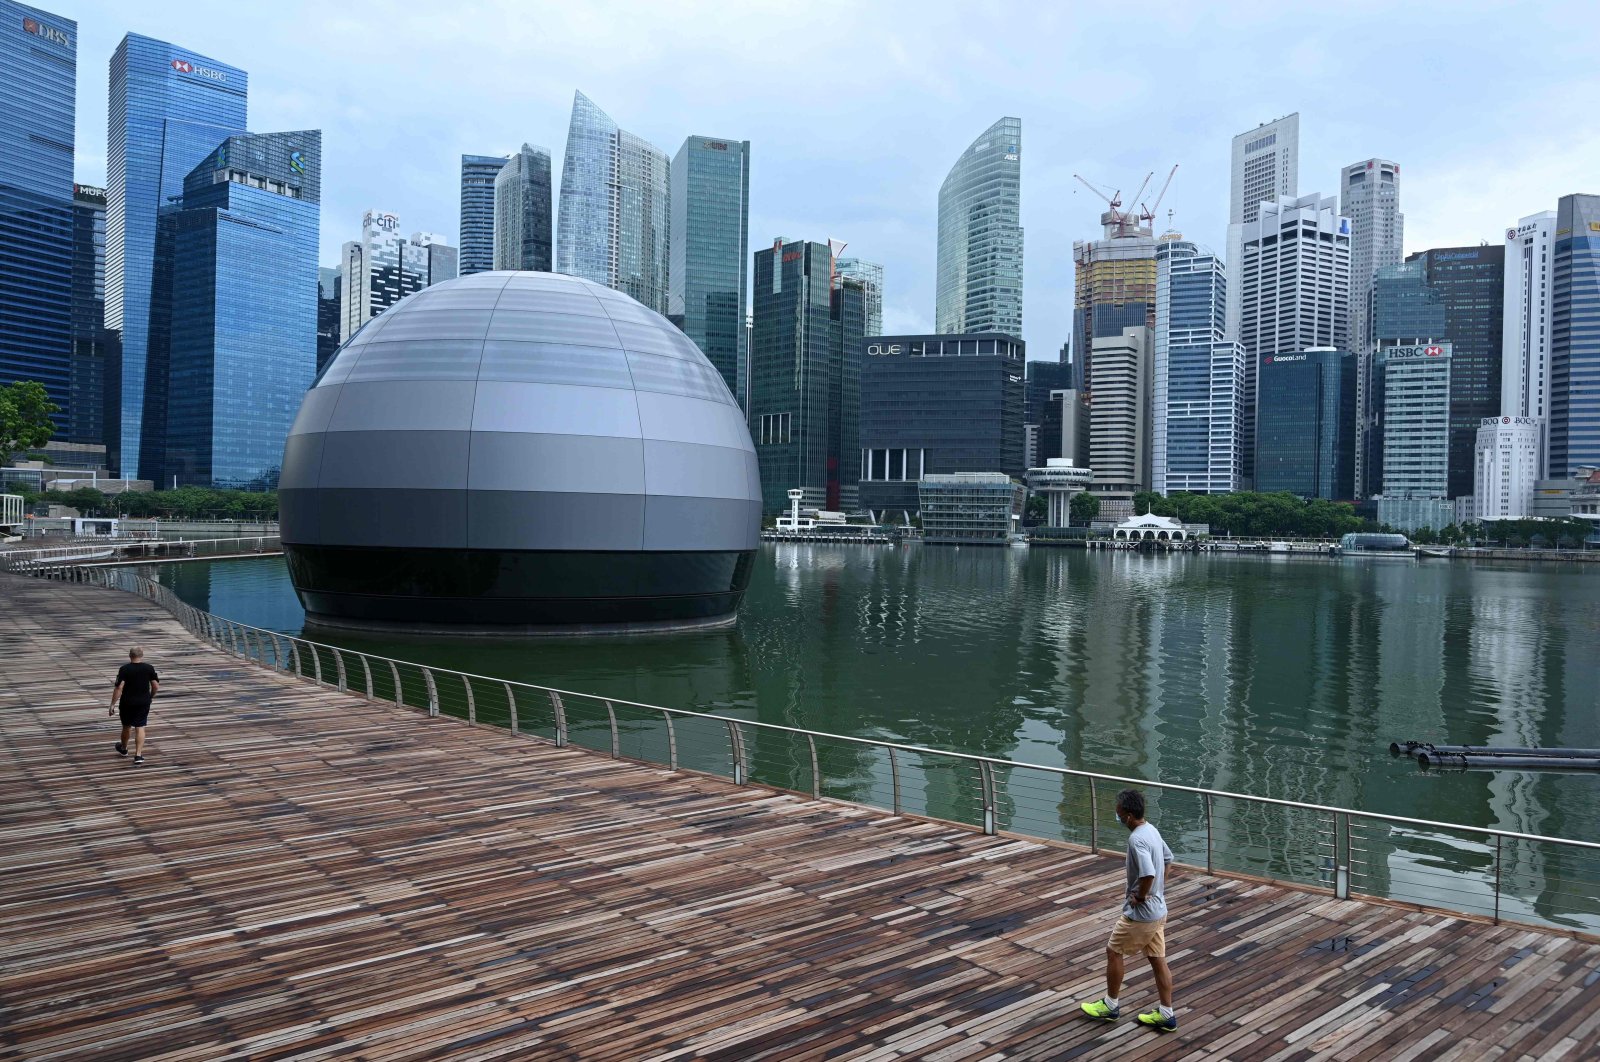 People wearing face masks as a preventive measure against the spread of the COVID-19 outbreak walk along the promenade at Marina Bay in Singapore, May 4, 2020. (AFP Photo)